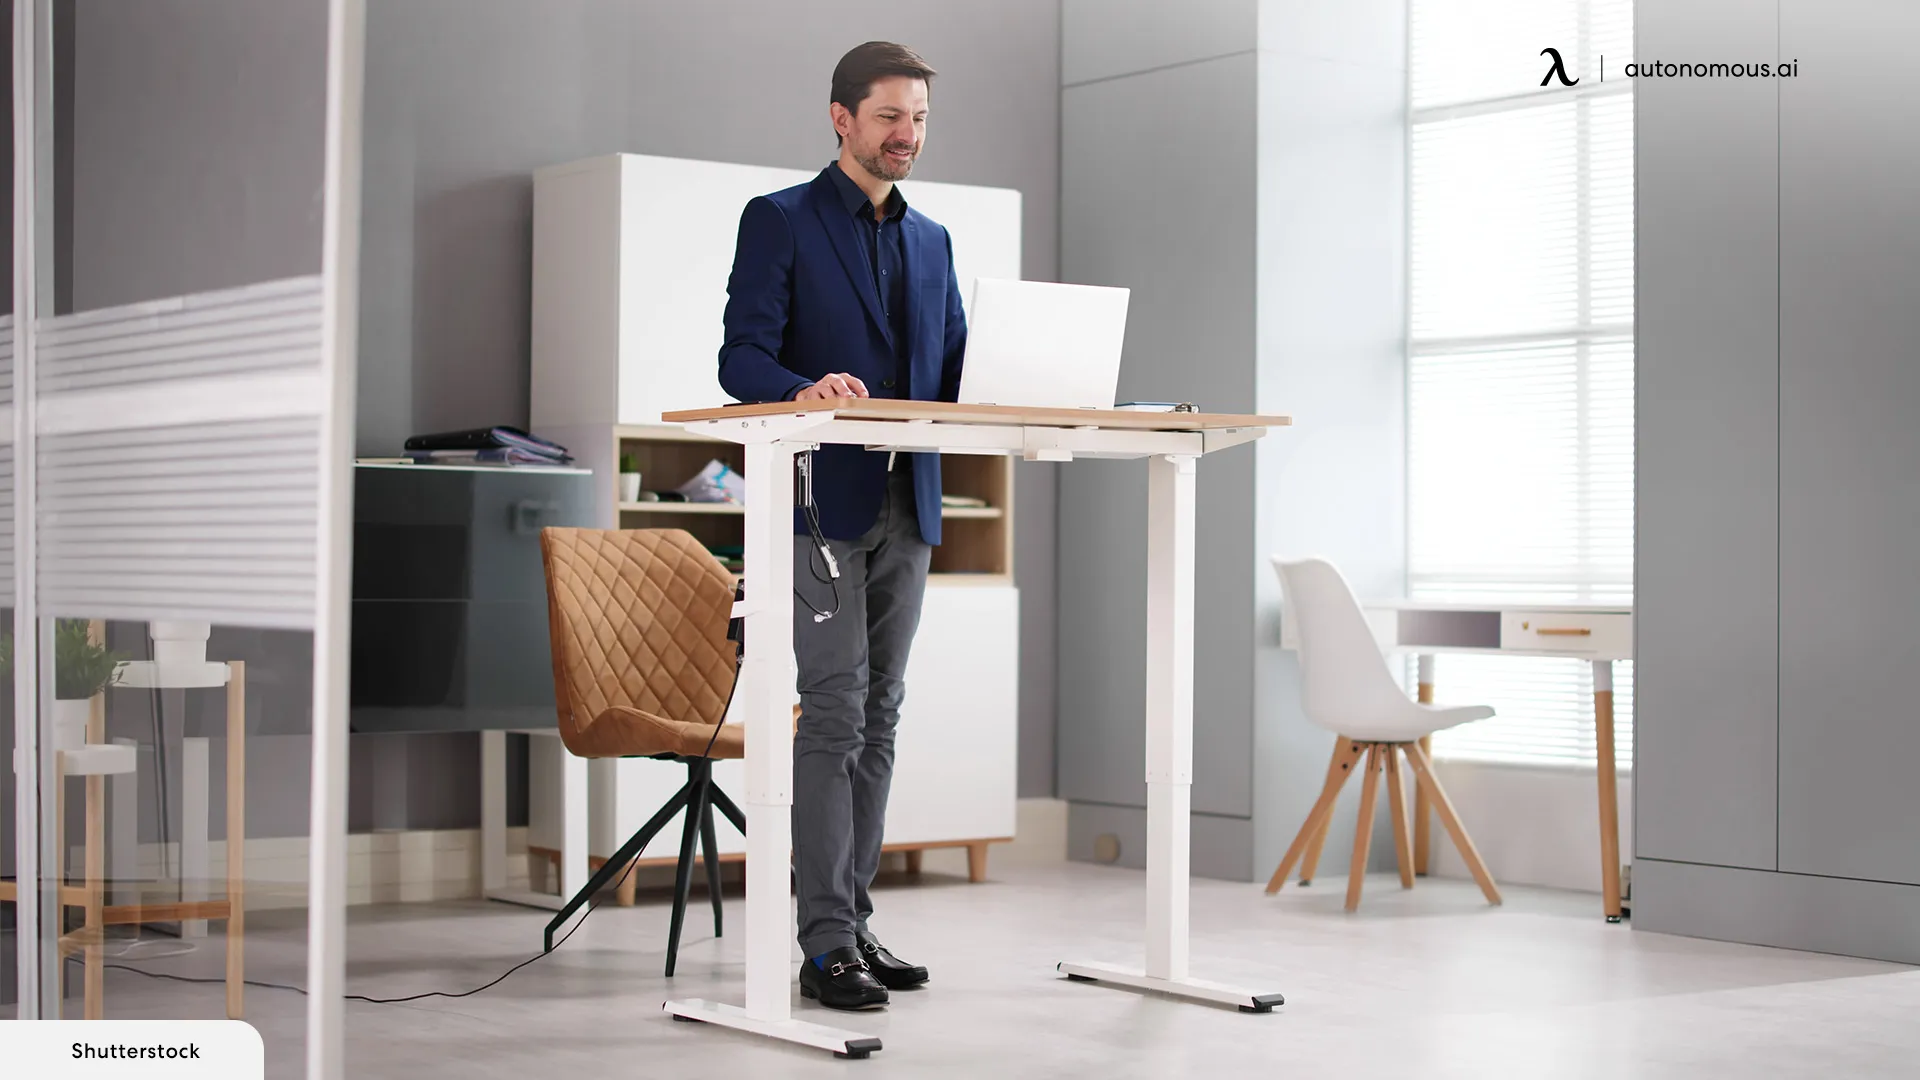 DIY Solutions to Help Cut the Standing Desk Cost